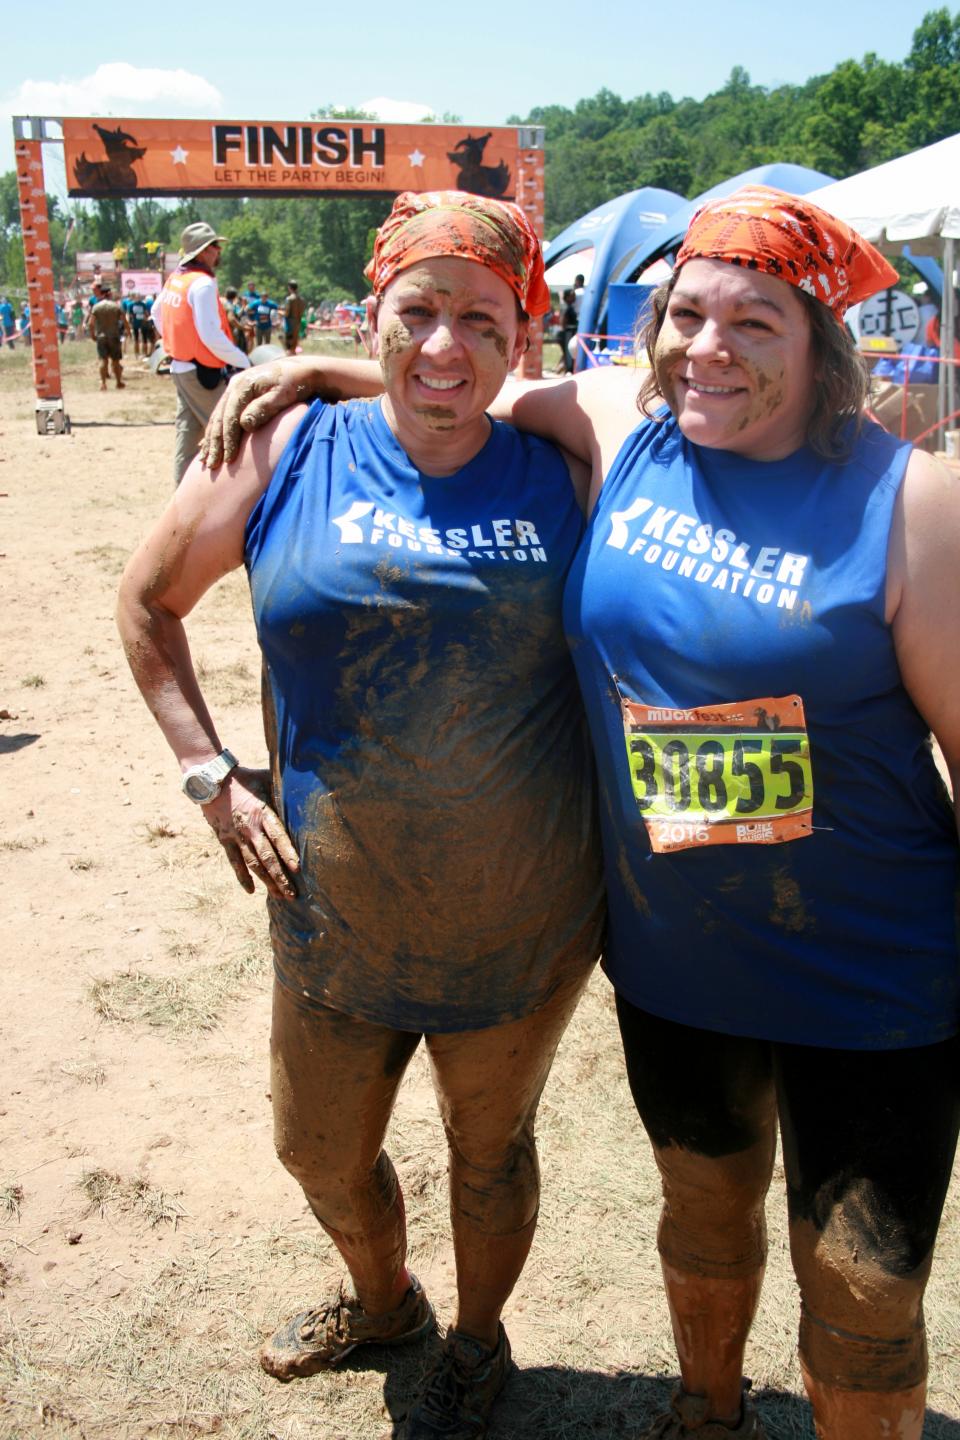 Employees Cherie Giraud and Lauren Strober at the MuckFest, an event benefitting the National Multiple Sclerosis Society - June 2016.